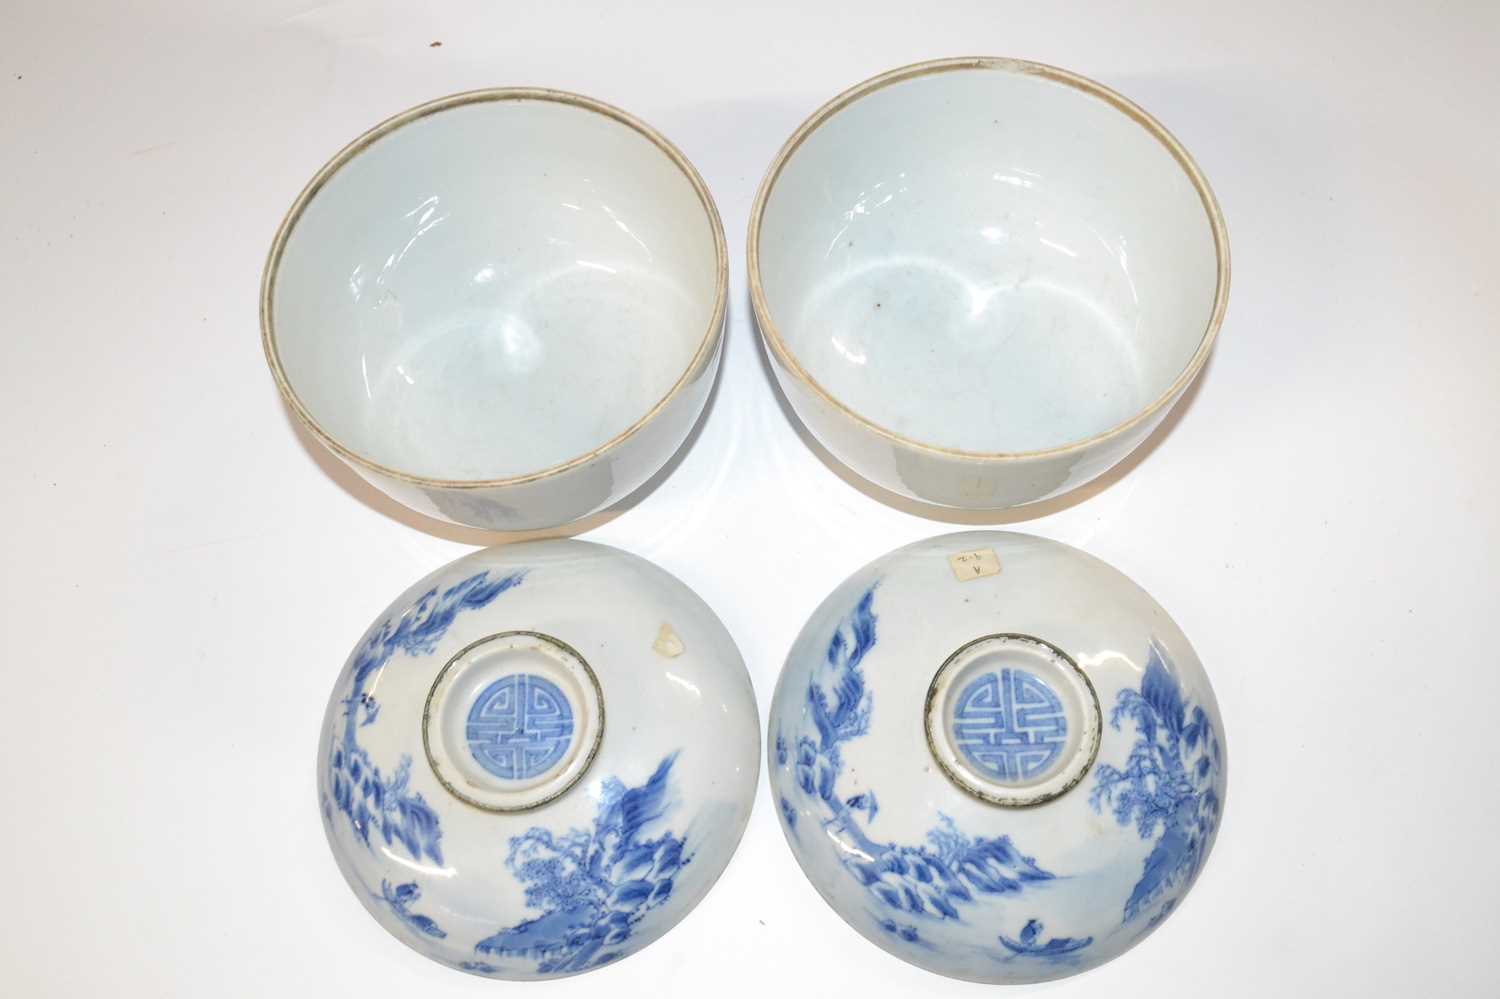 Two Oriental porcelain bowls and covers with blue and white designs, the covers with good luck - Image 5 of 5